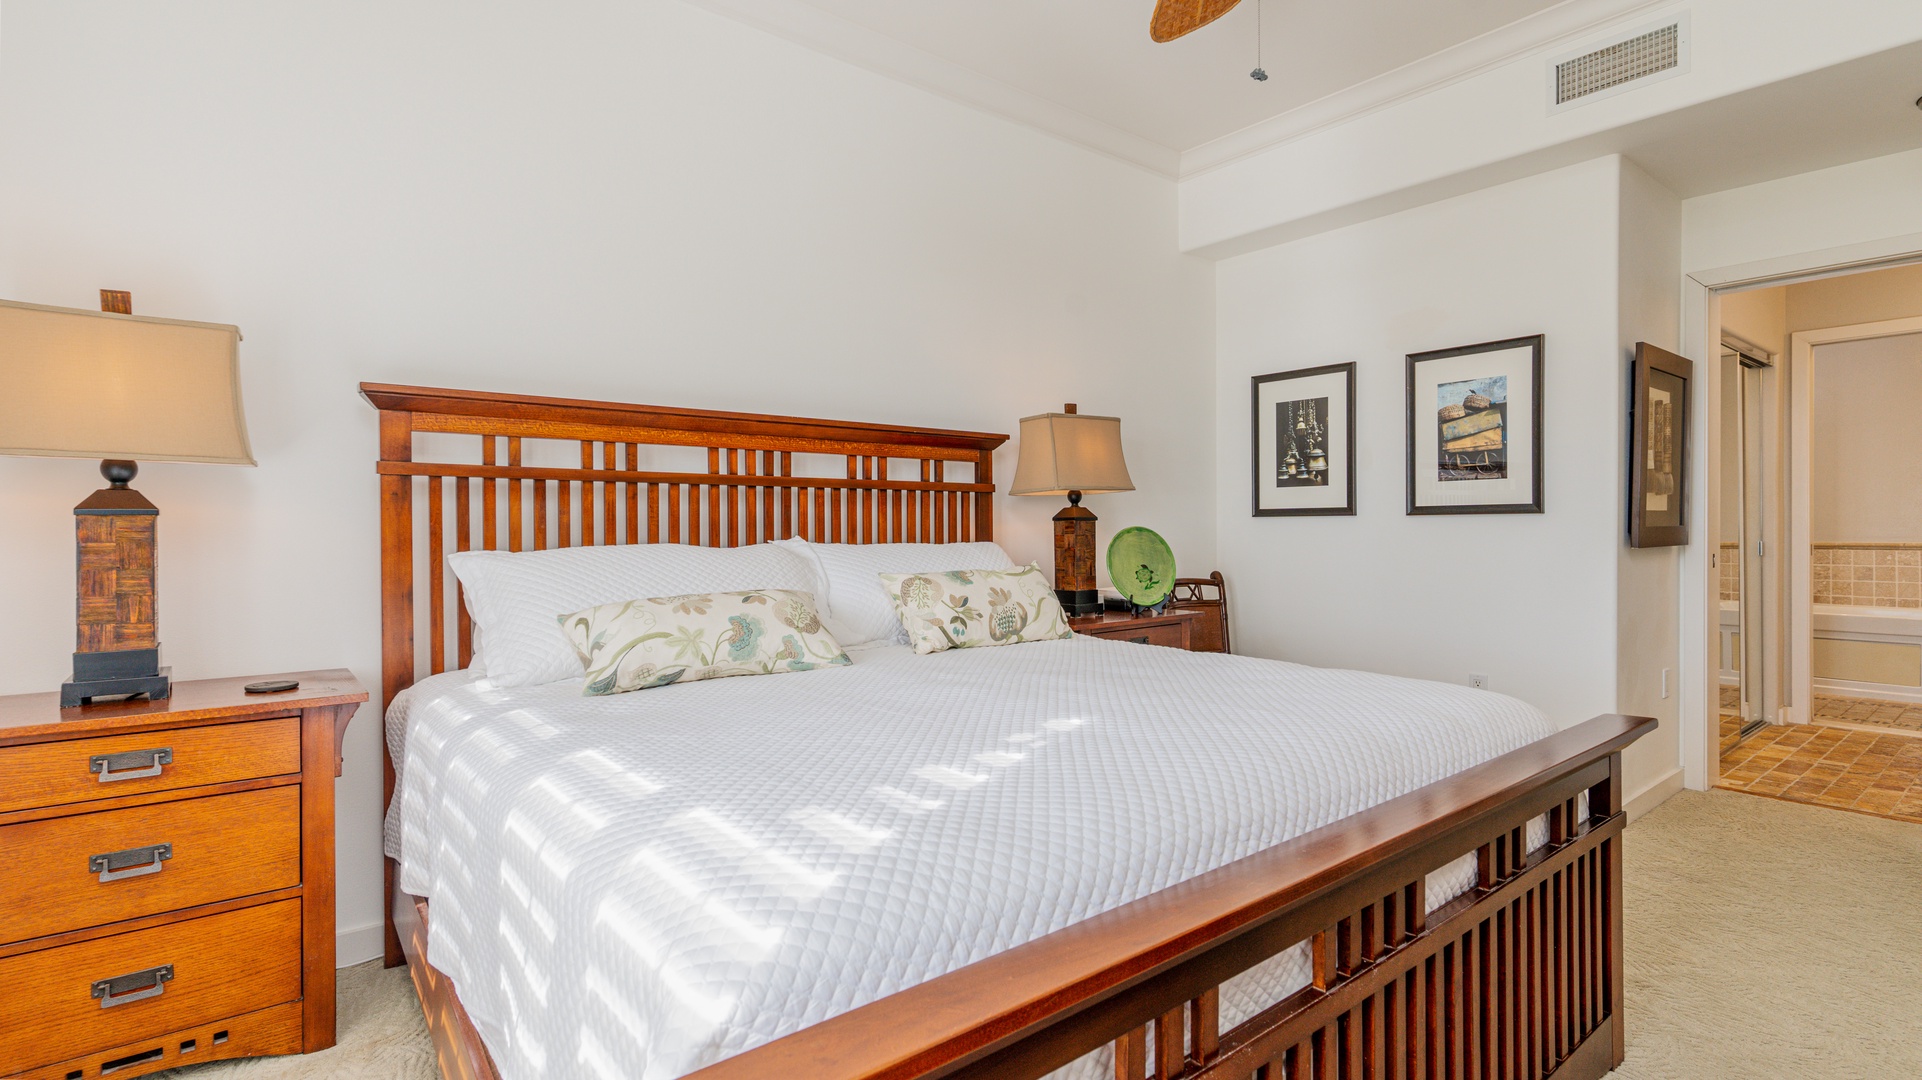 Kapolei Vacation Rentals, Kai Lani 24B - The primary guest bedroom with a king bed and framed art.